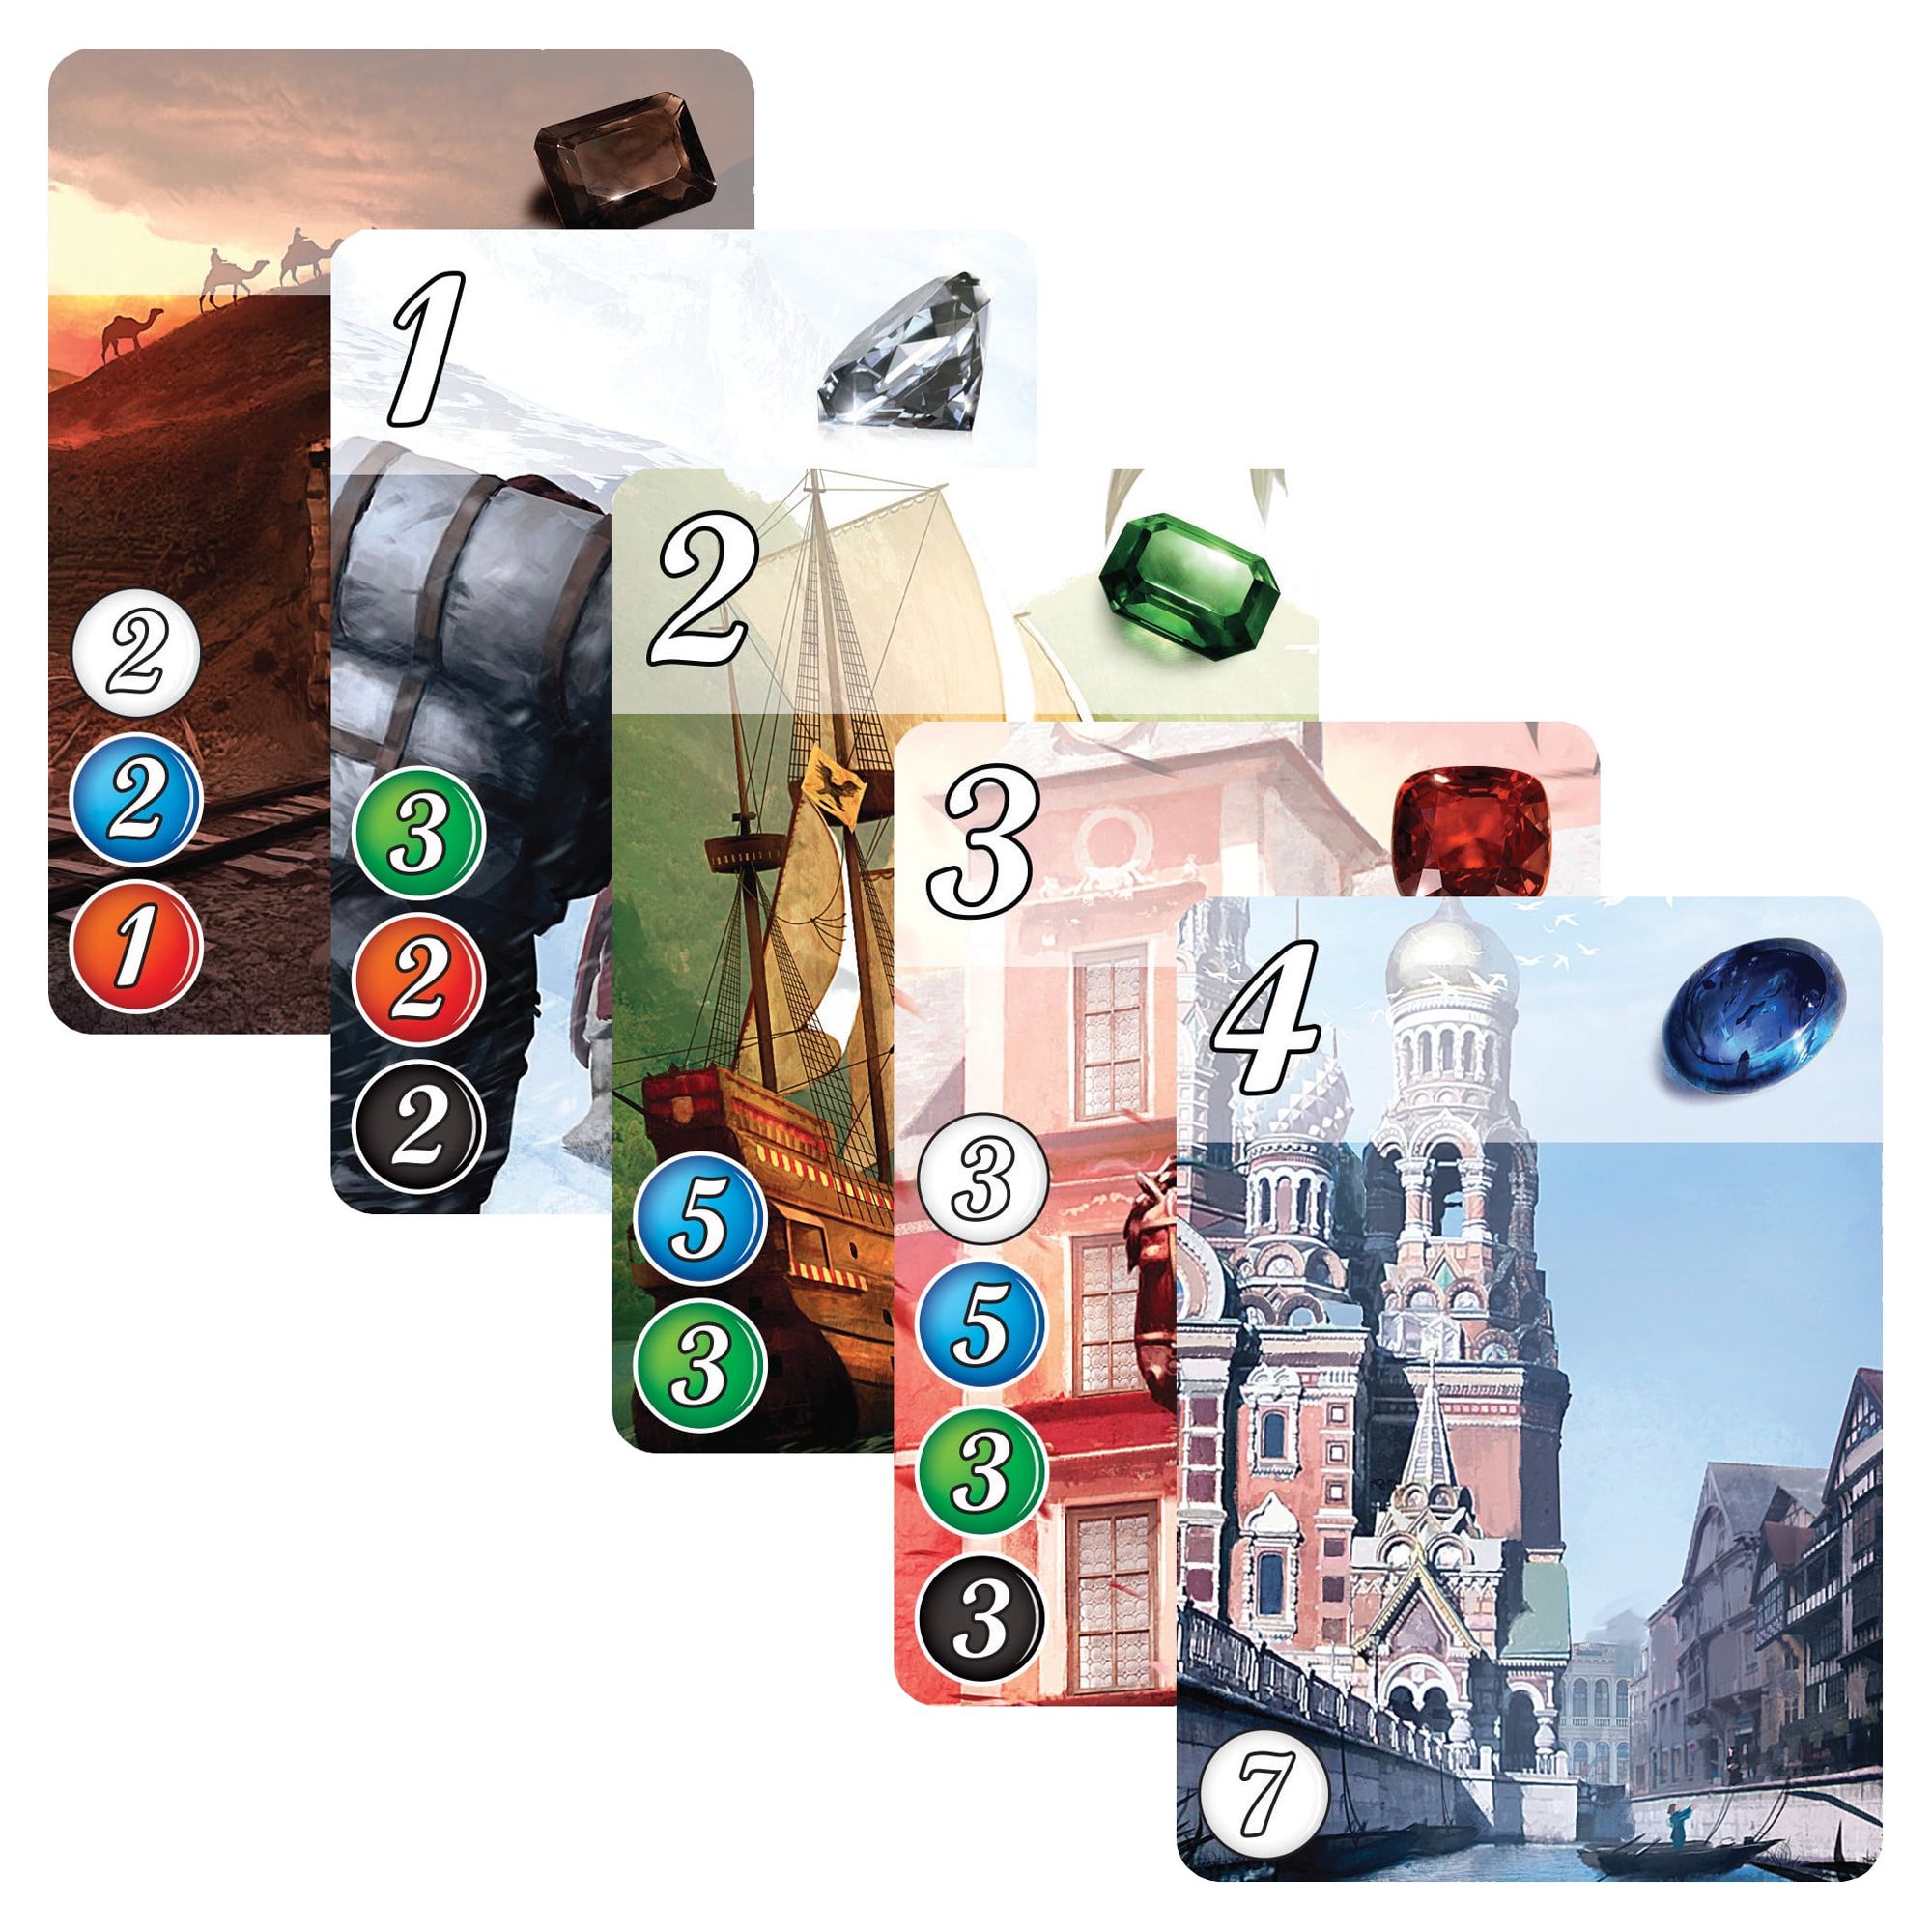 Splendor Strategy Board Game for Ages 10 and up, from Asmodee - image 5 of 8